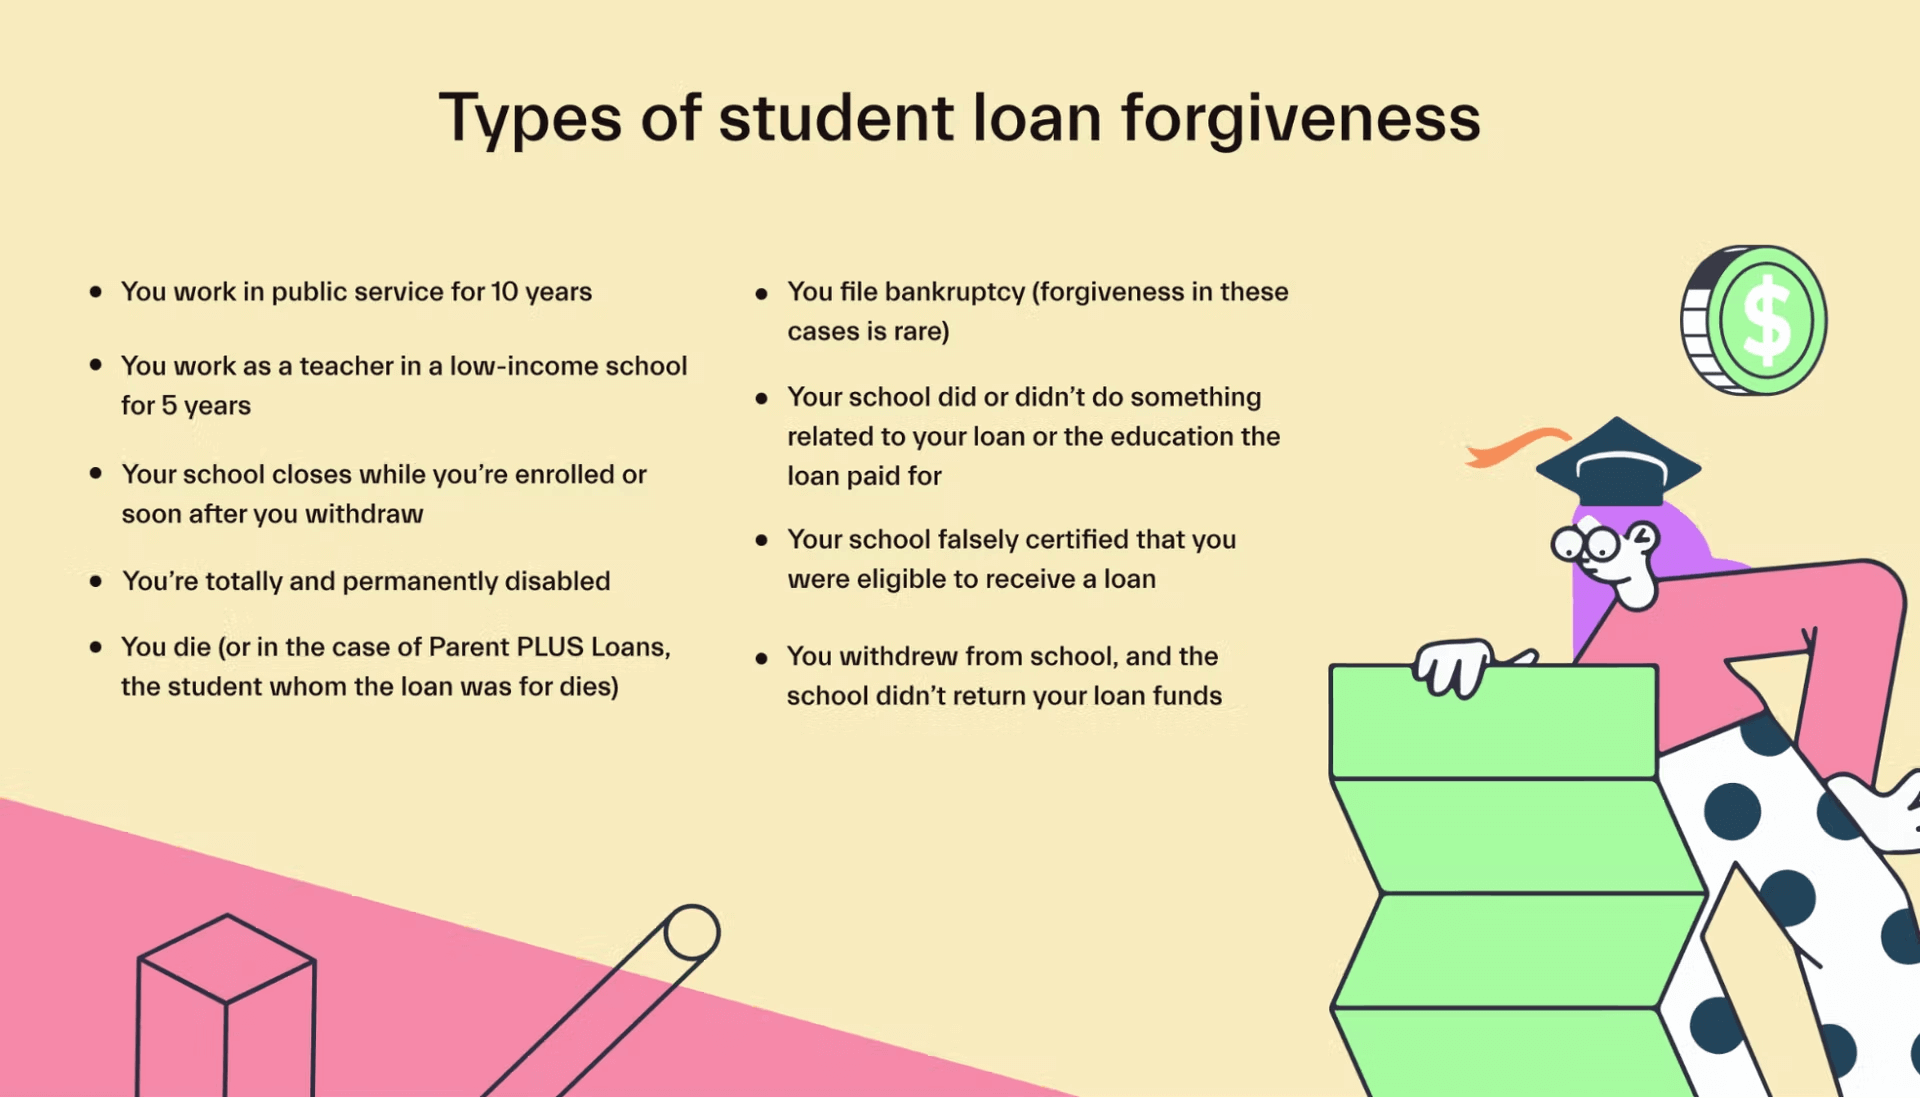 Types of Student Loan Forgiveness